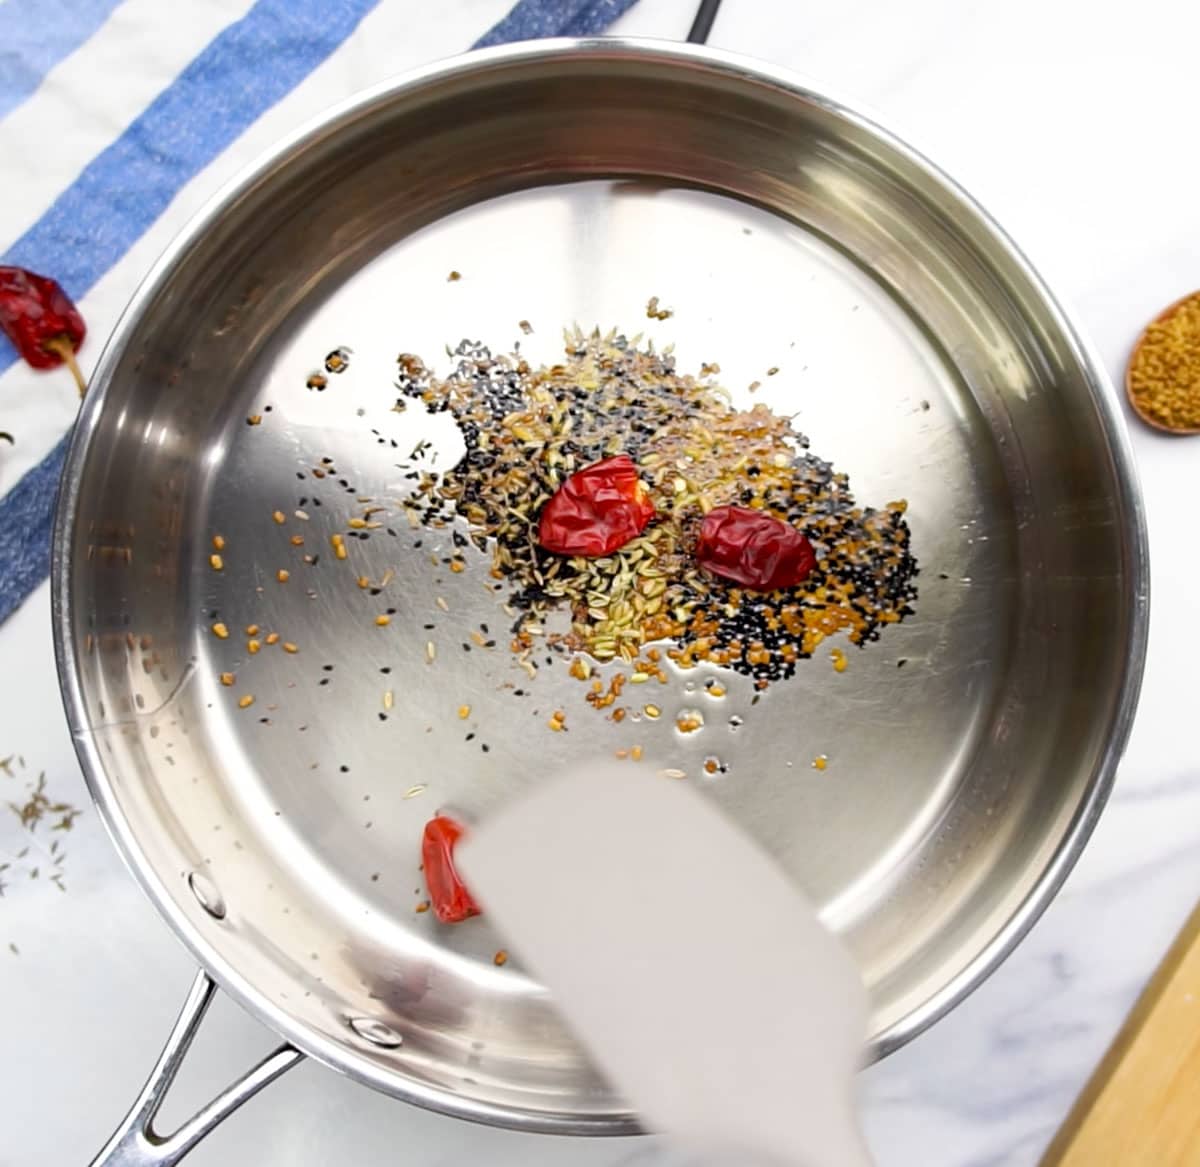 Cooking whole spices in the pan for about 30 seconds